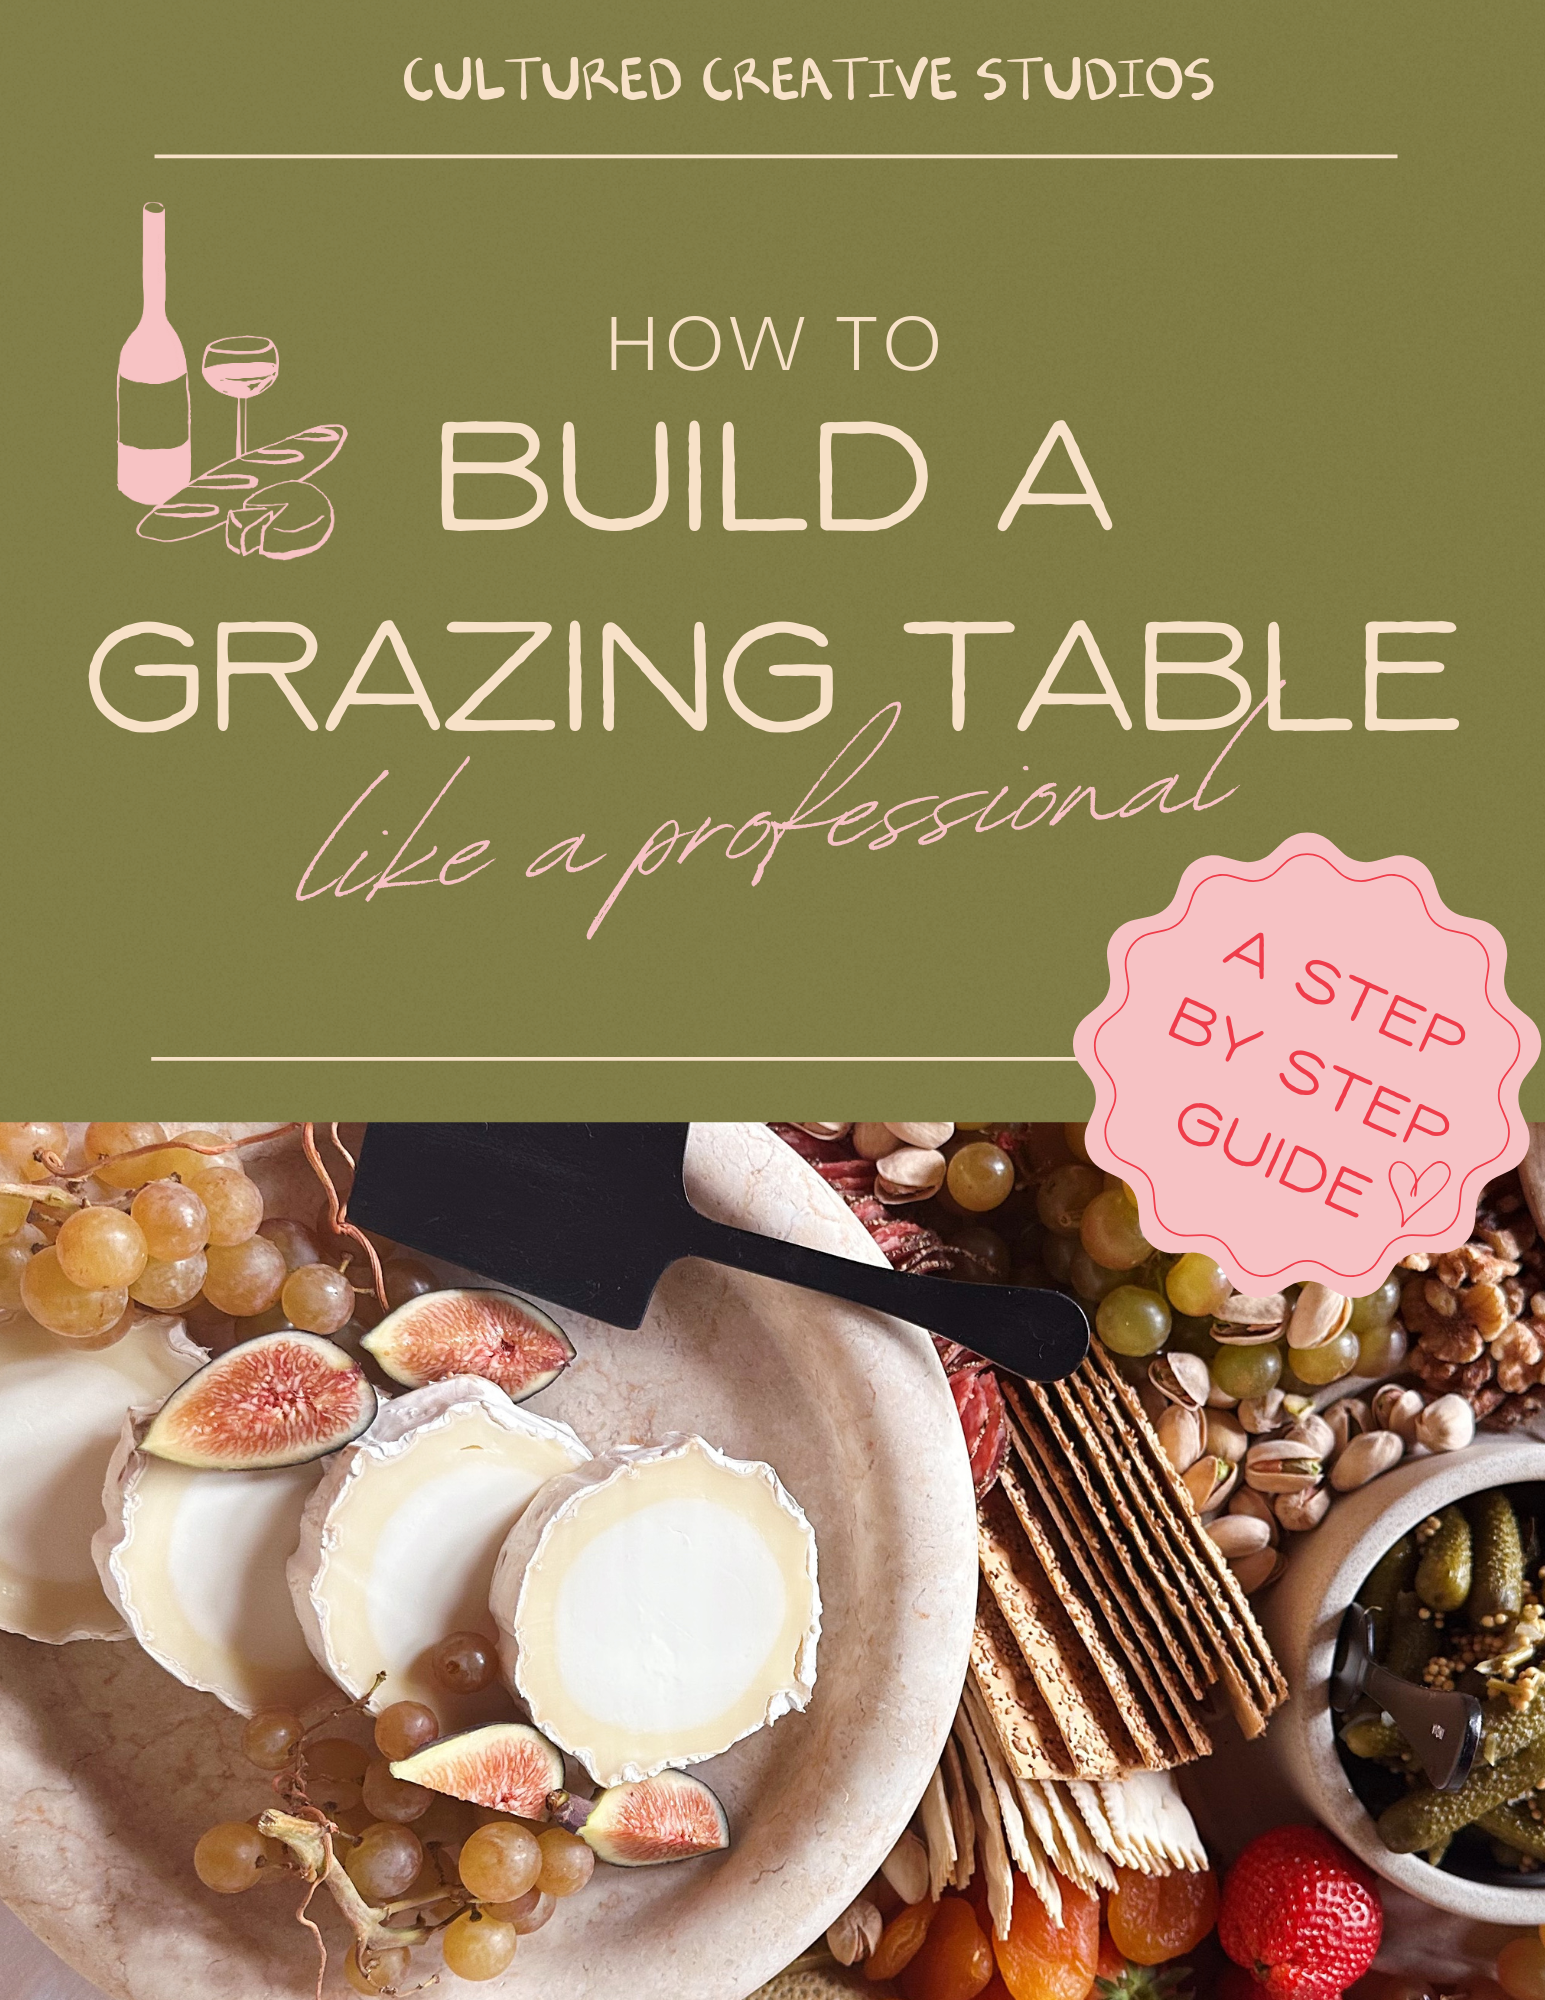 How to Build a Grazing Table, Like a Professional: A Handbook